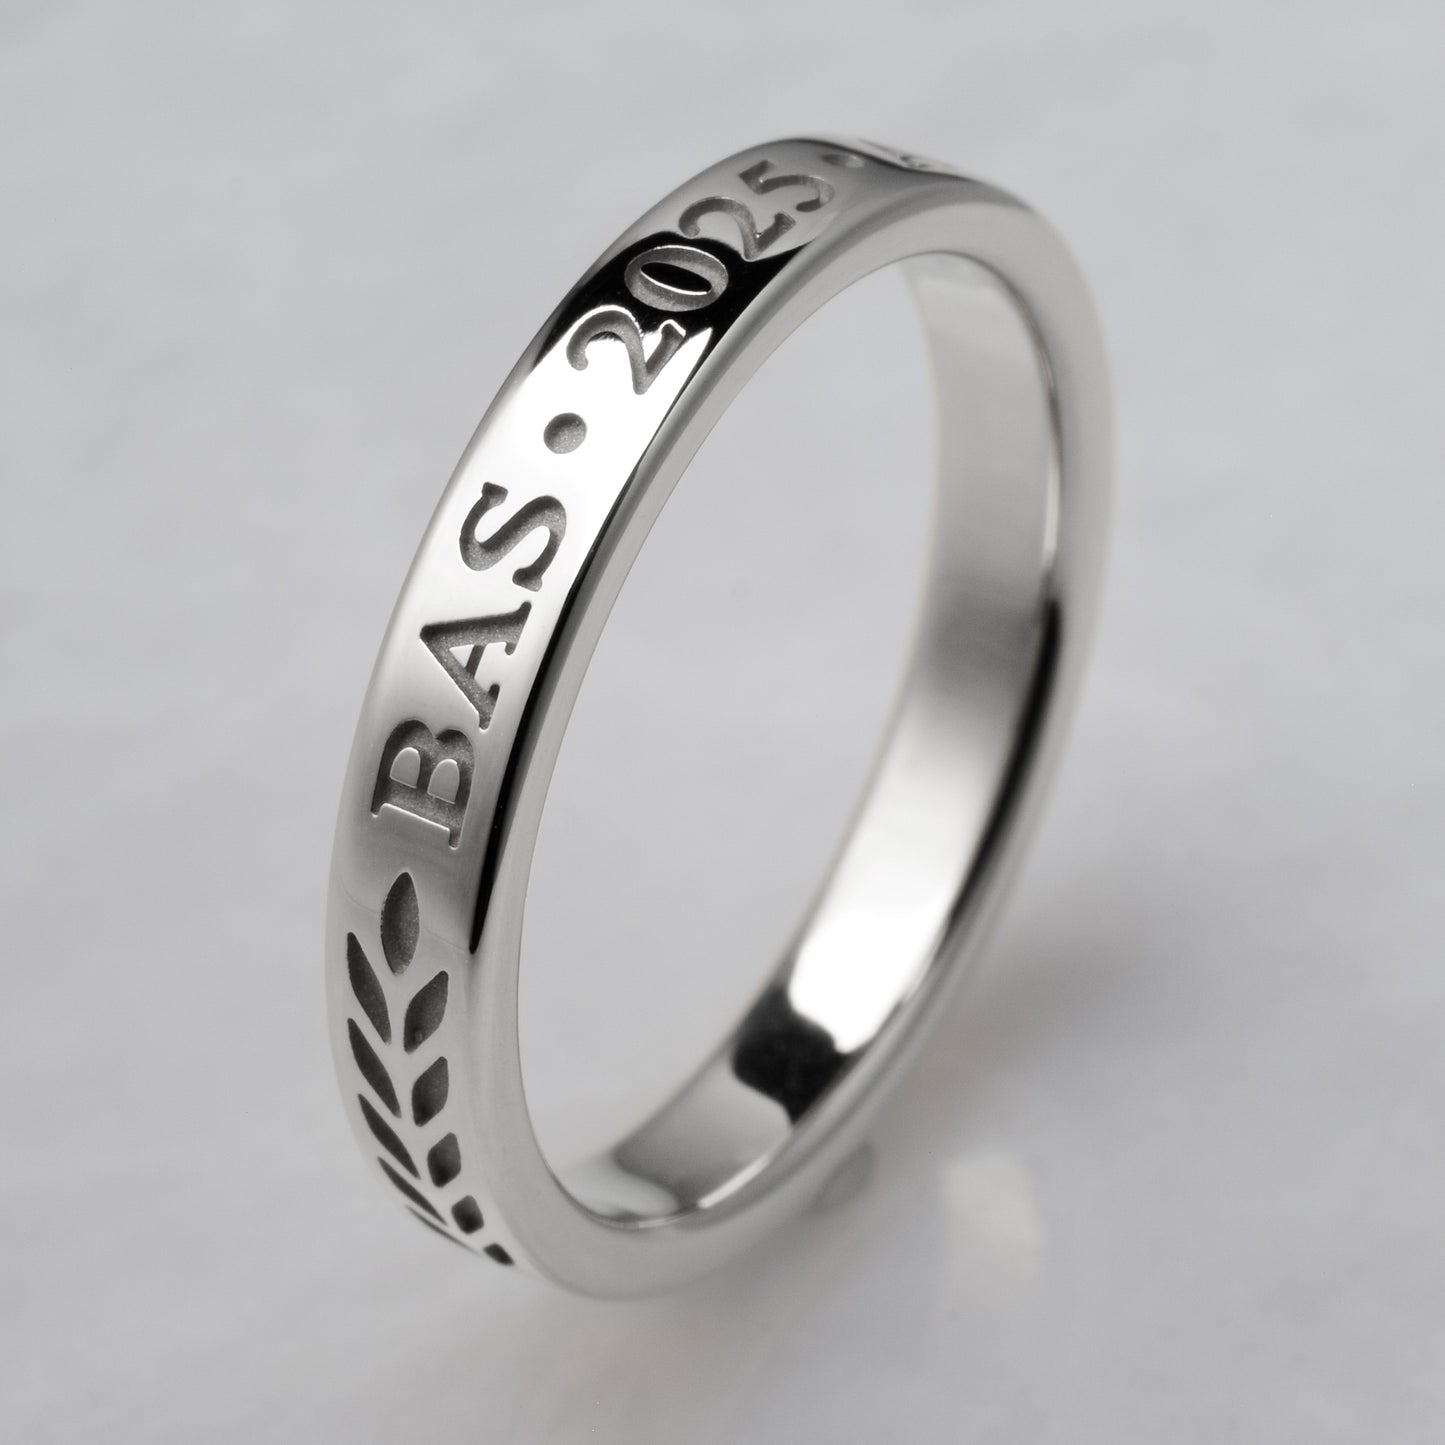 Graduation Ring - Engraved Style, White Gold